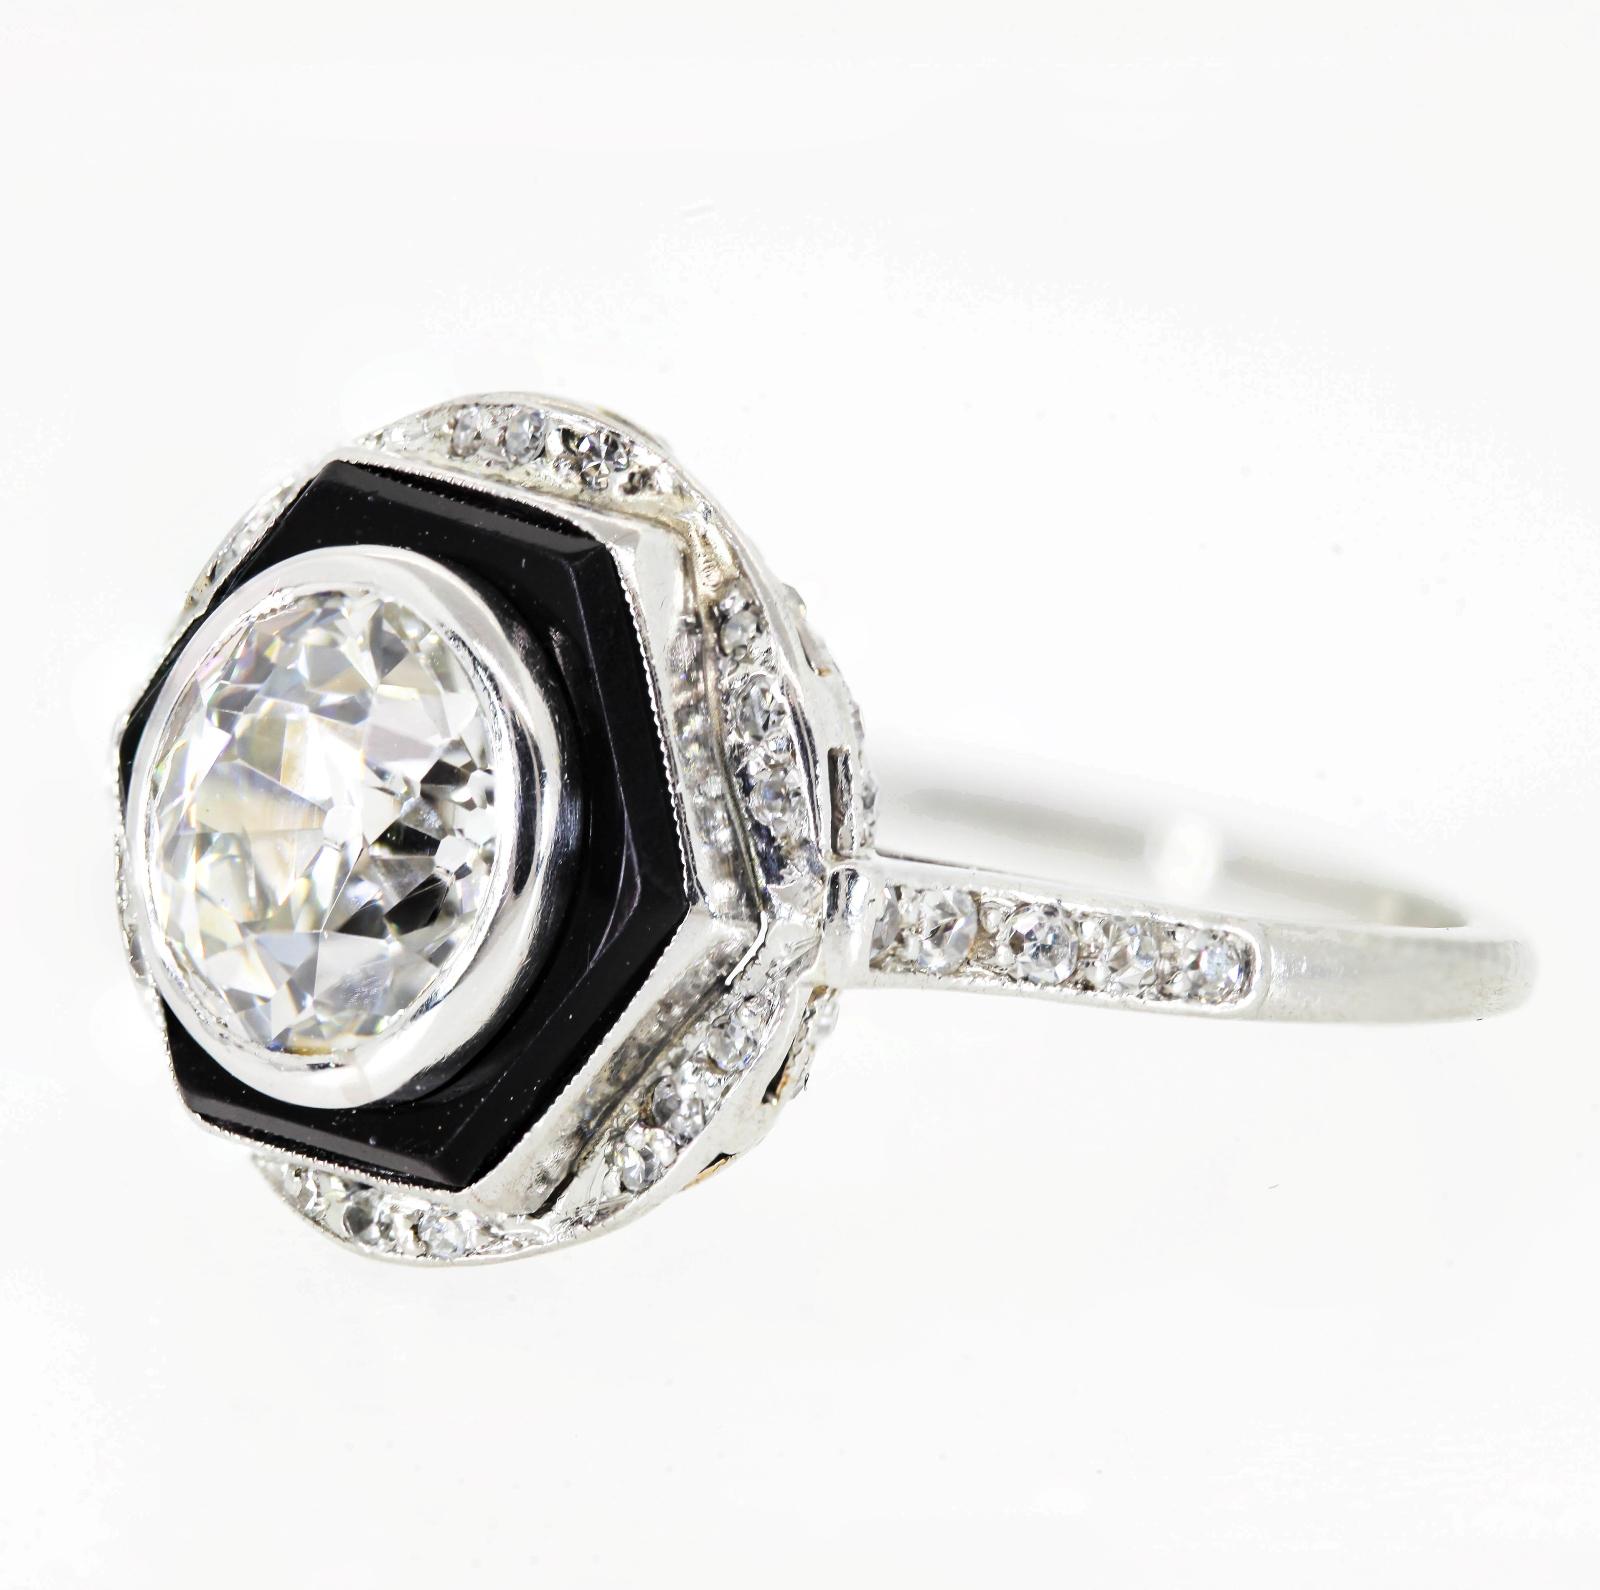 Hand created of platinum in the 1930s, this one of a kind beauty centers a sparkling 1.65 carat Old European cut Diamond - I/J color - SI1 clarity.  The diamond is surrounded by a hexagonal Onyx disc, making a stunning contrast to the white diamond.